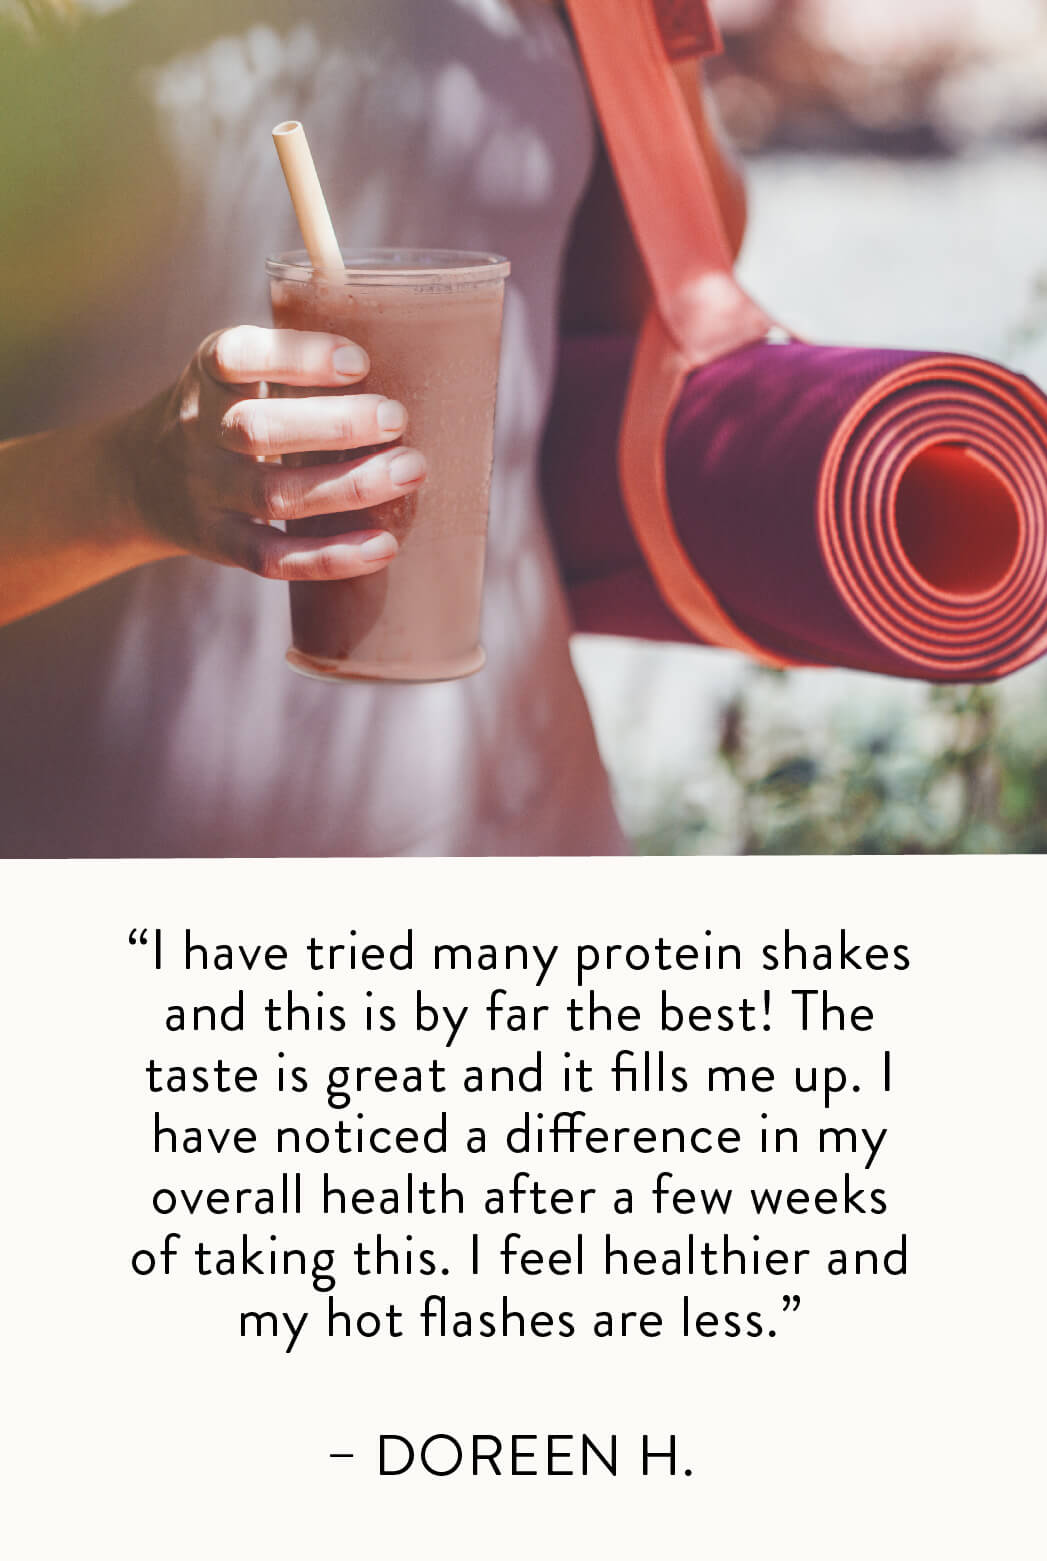 "I have tried many protein shakes and this is by far the best! The taste is great and it fills me up. I have noticed a difference in my overall health after a few weeks of taking this. I feel healthier and my hot flashes are less." — Doreen H.